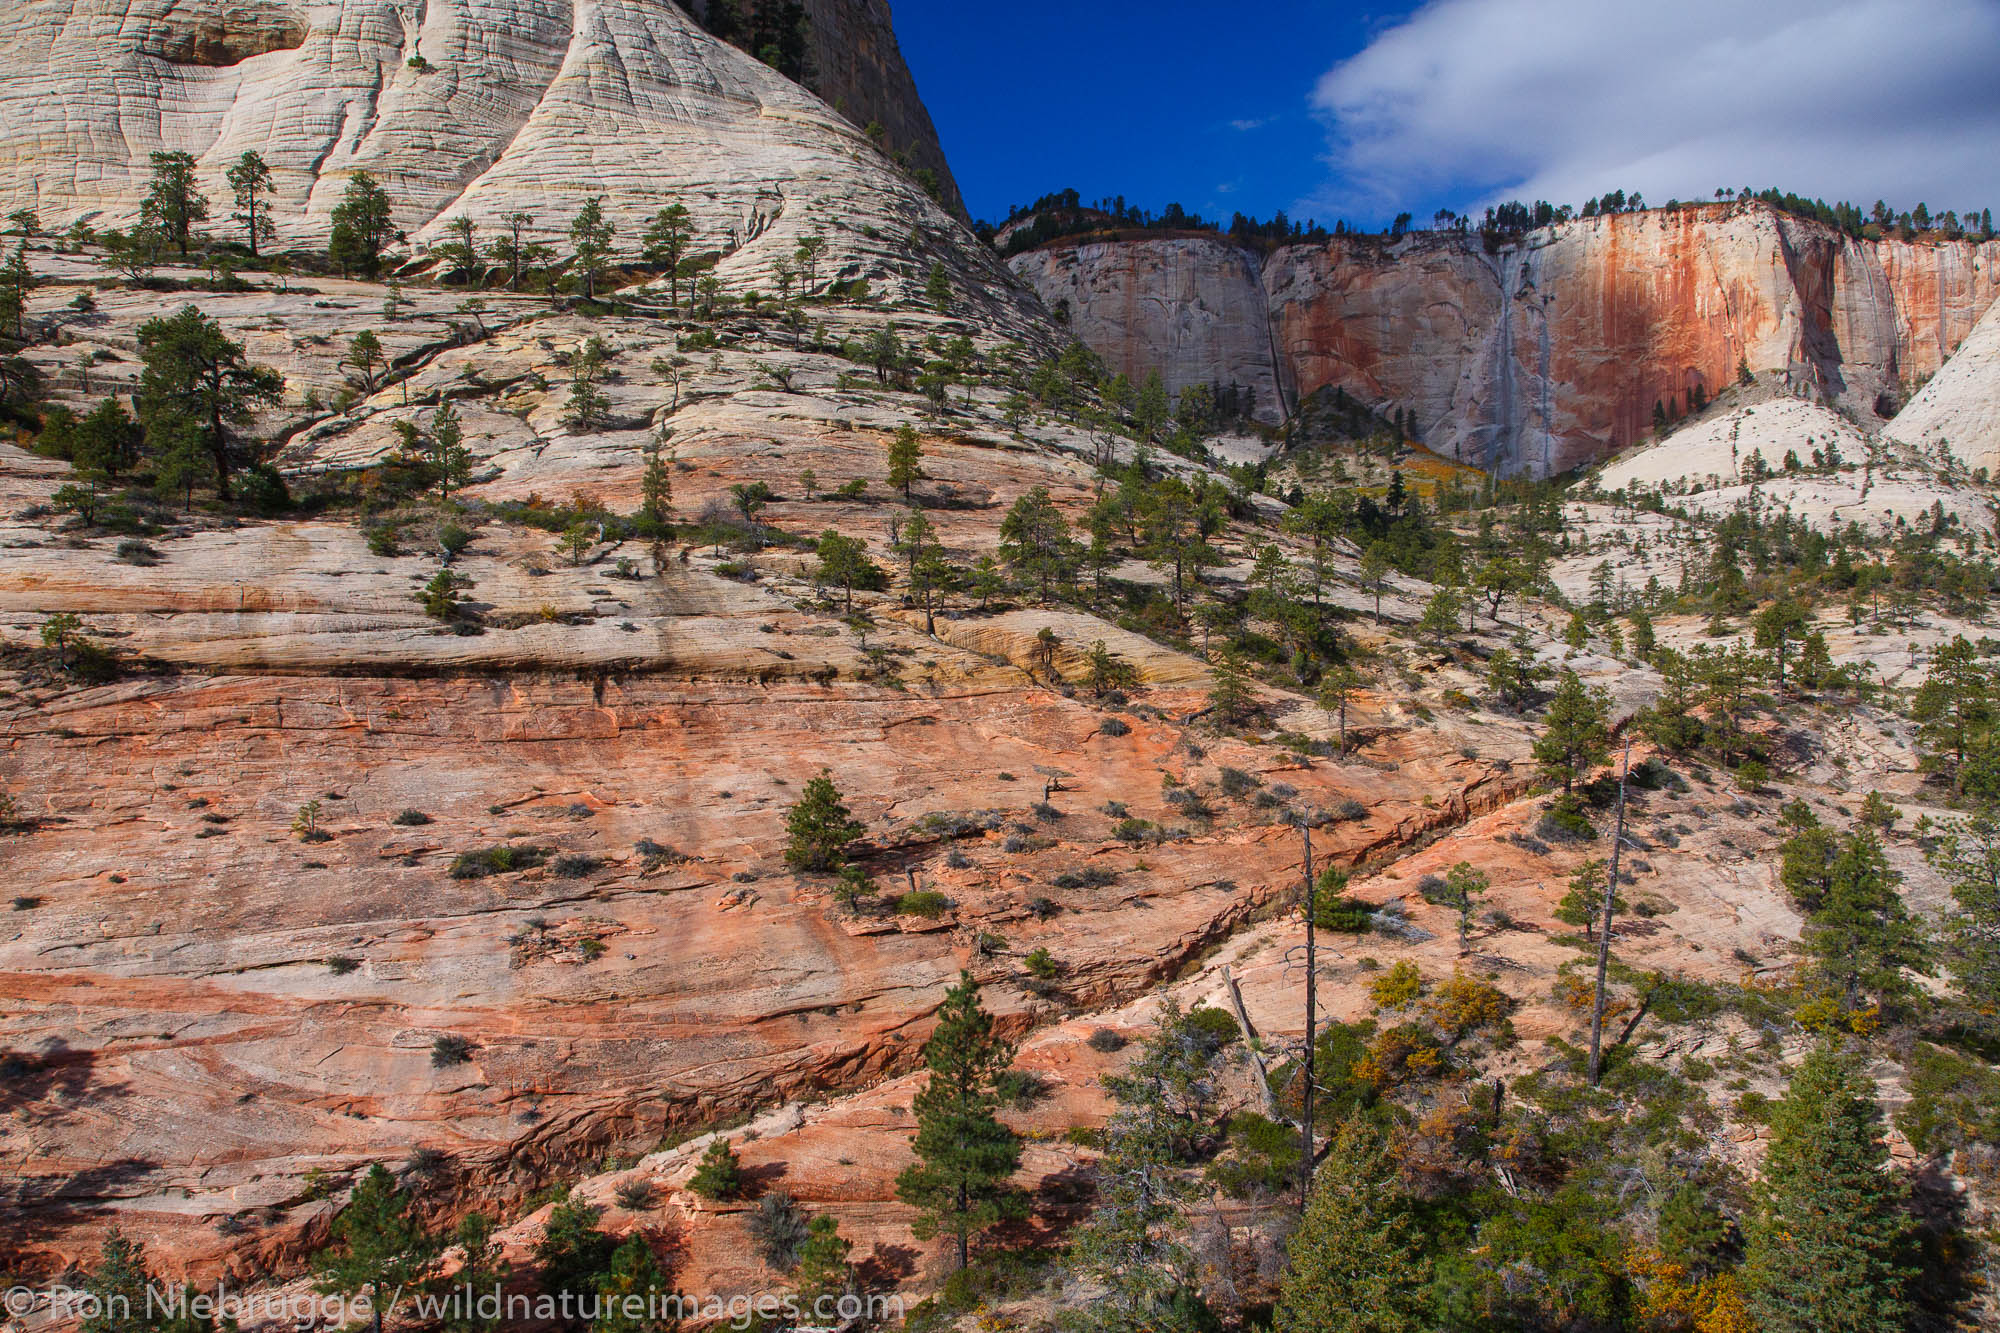 From the West Rim Trail, Zion National Park, Utah.